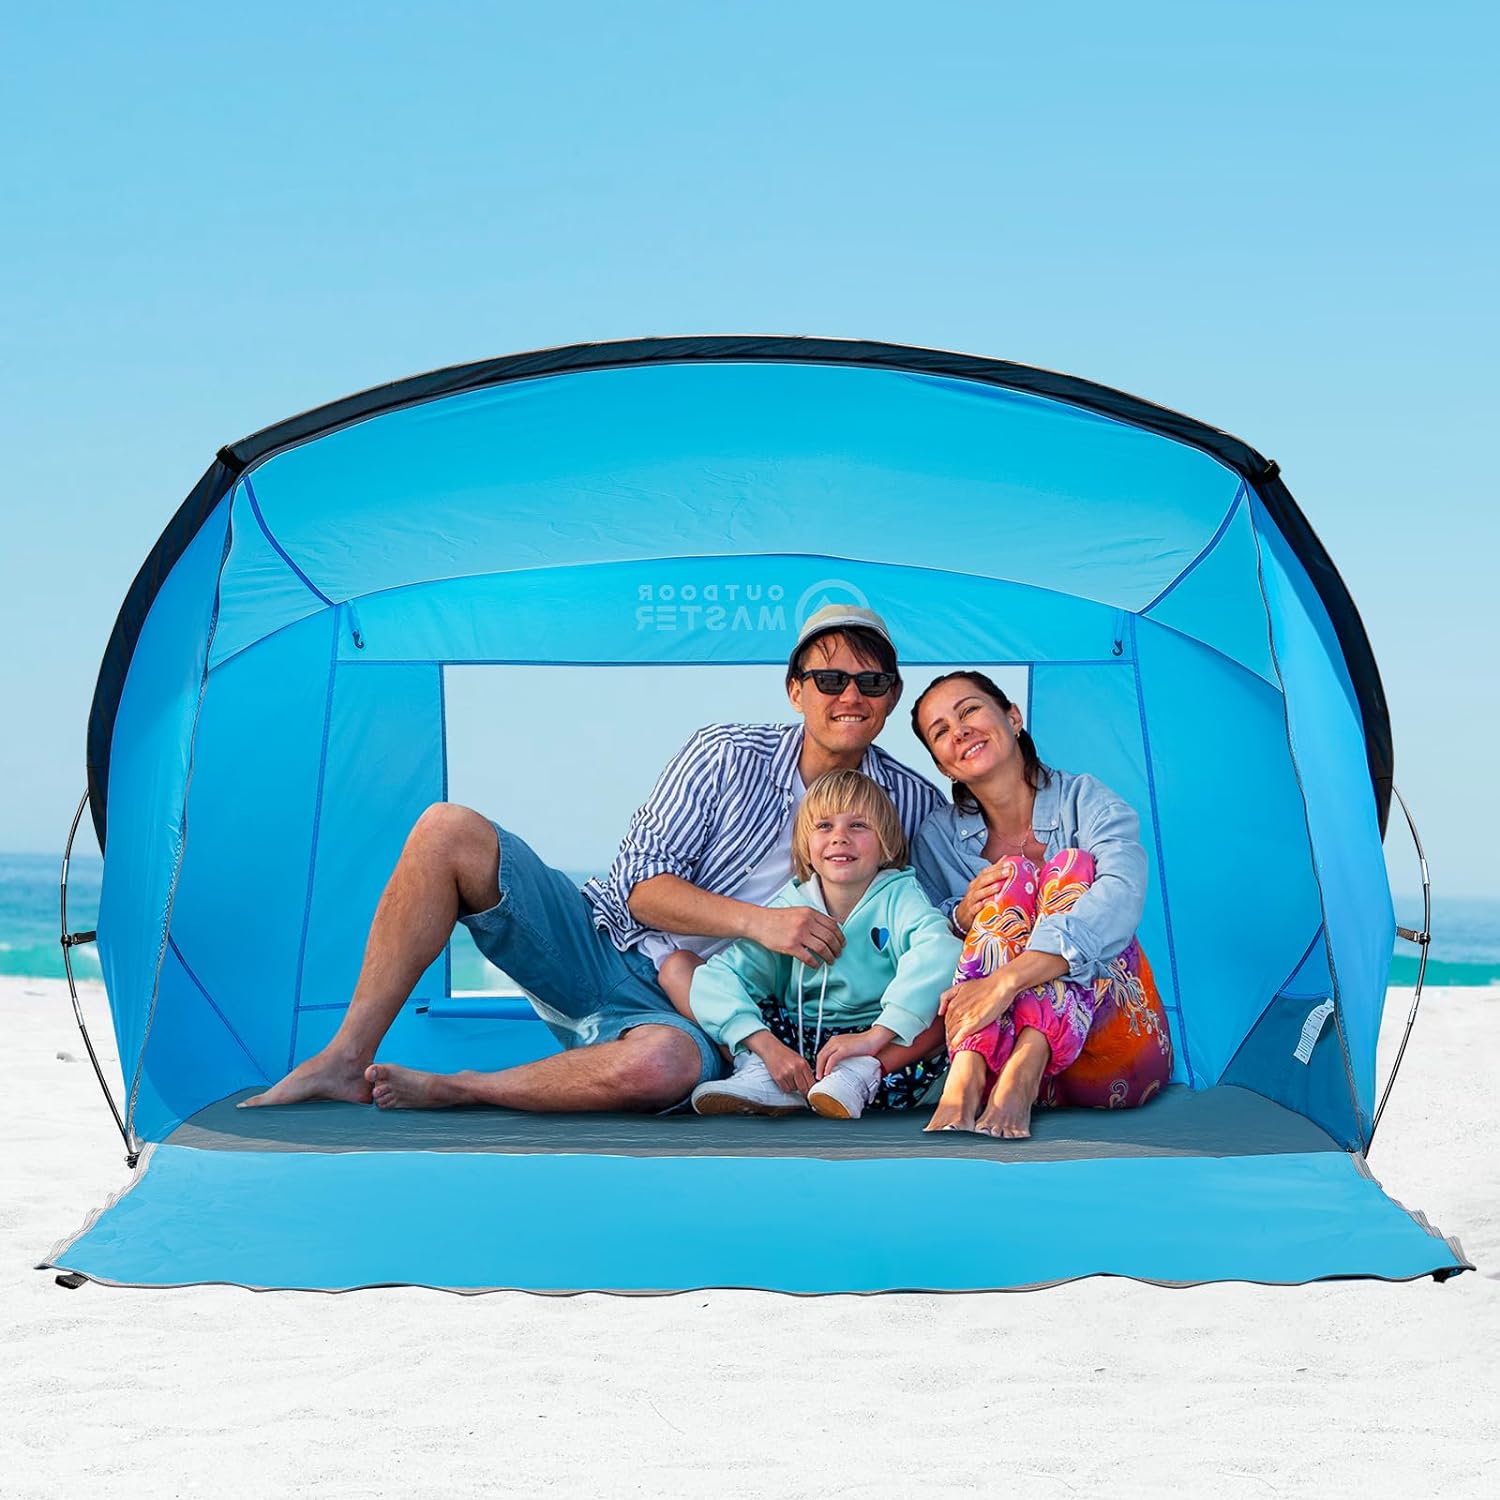 OutdoorMaster Beach Tent Review